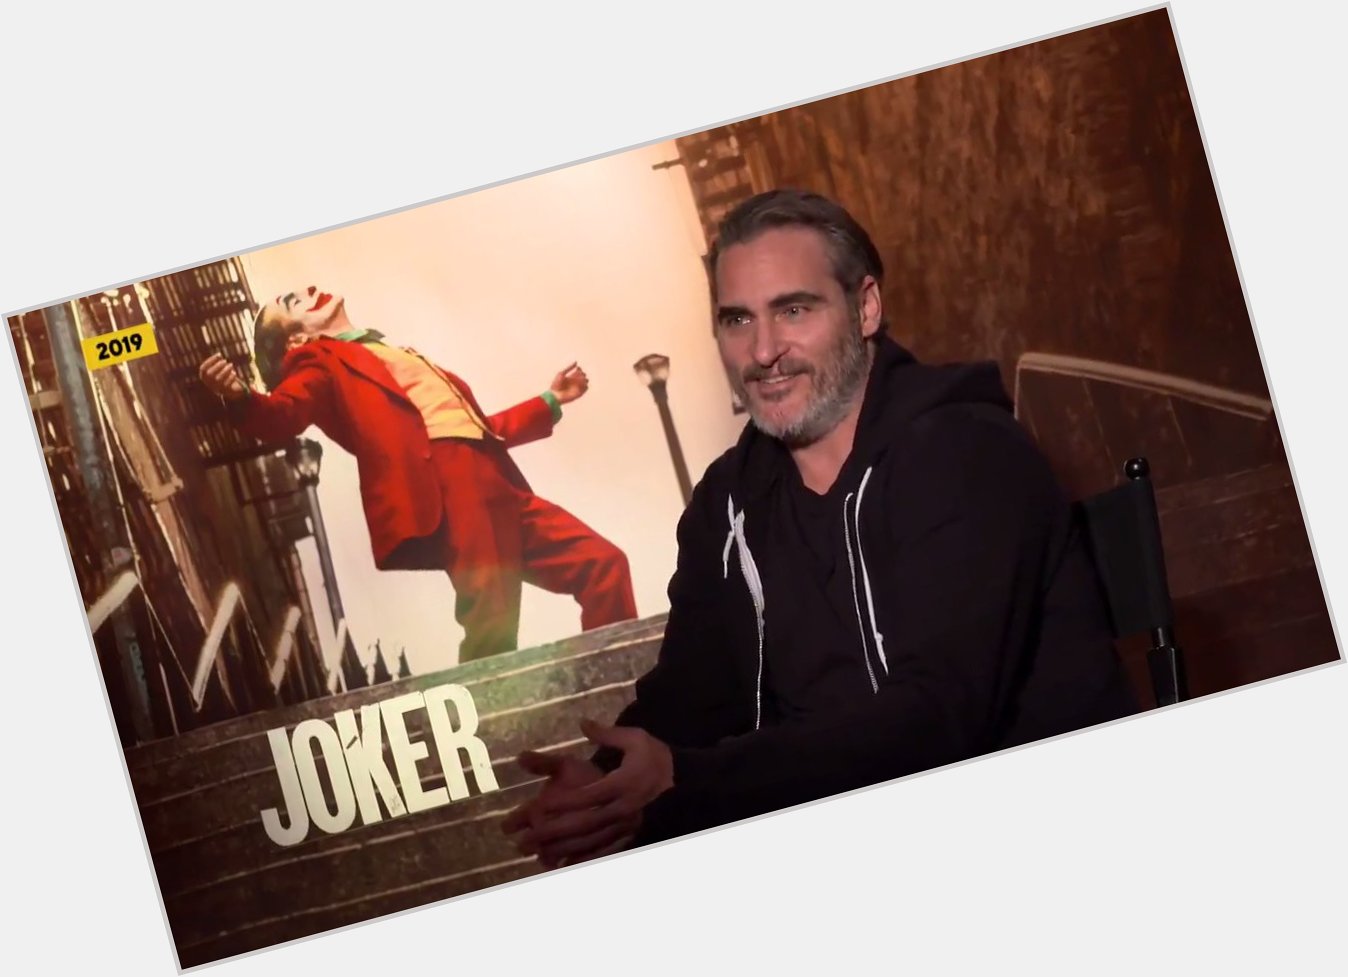 Happy Birthday to our perfect Joaquin Phoenix! We hope your birthday is full of laughter. 